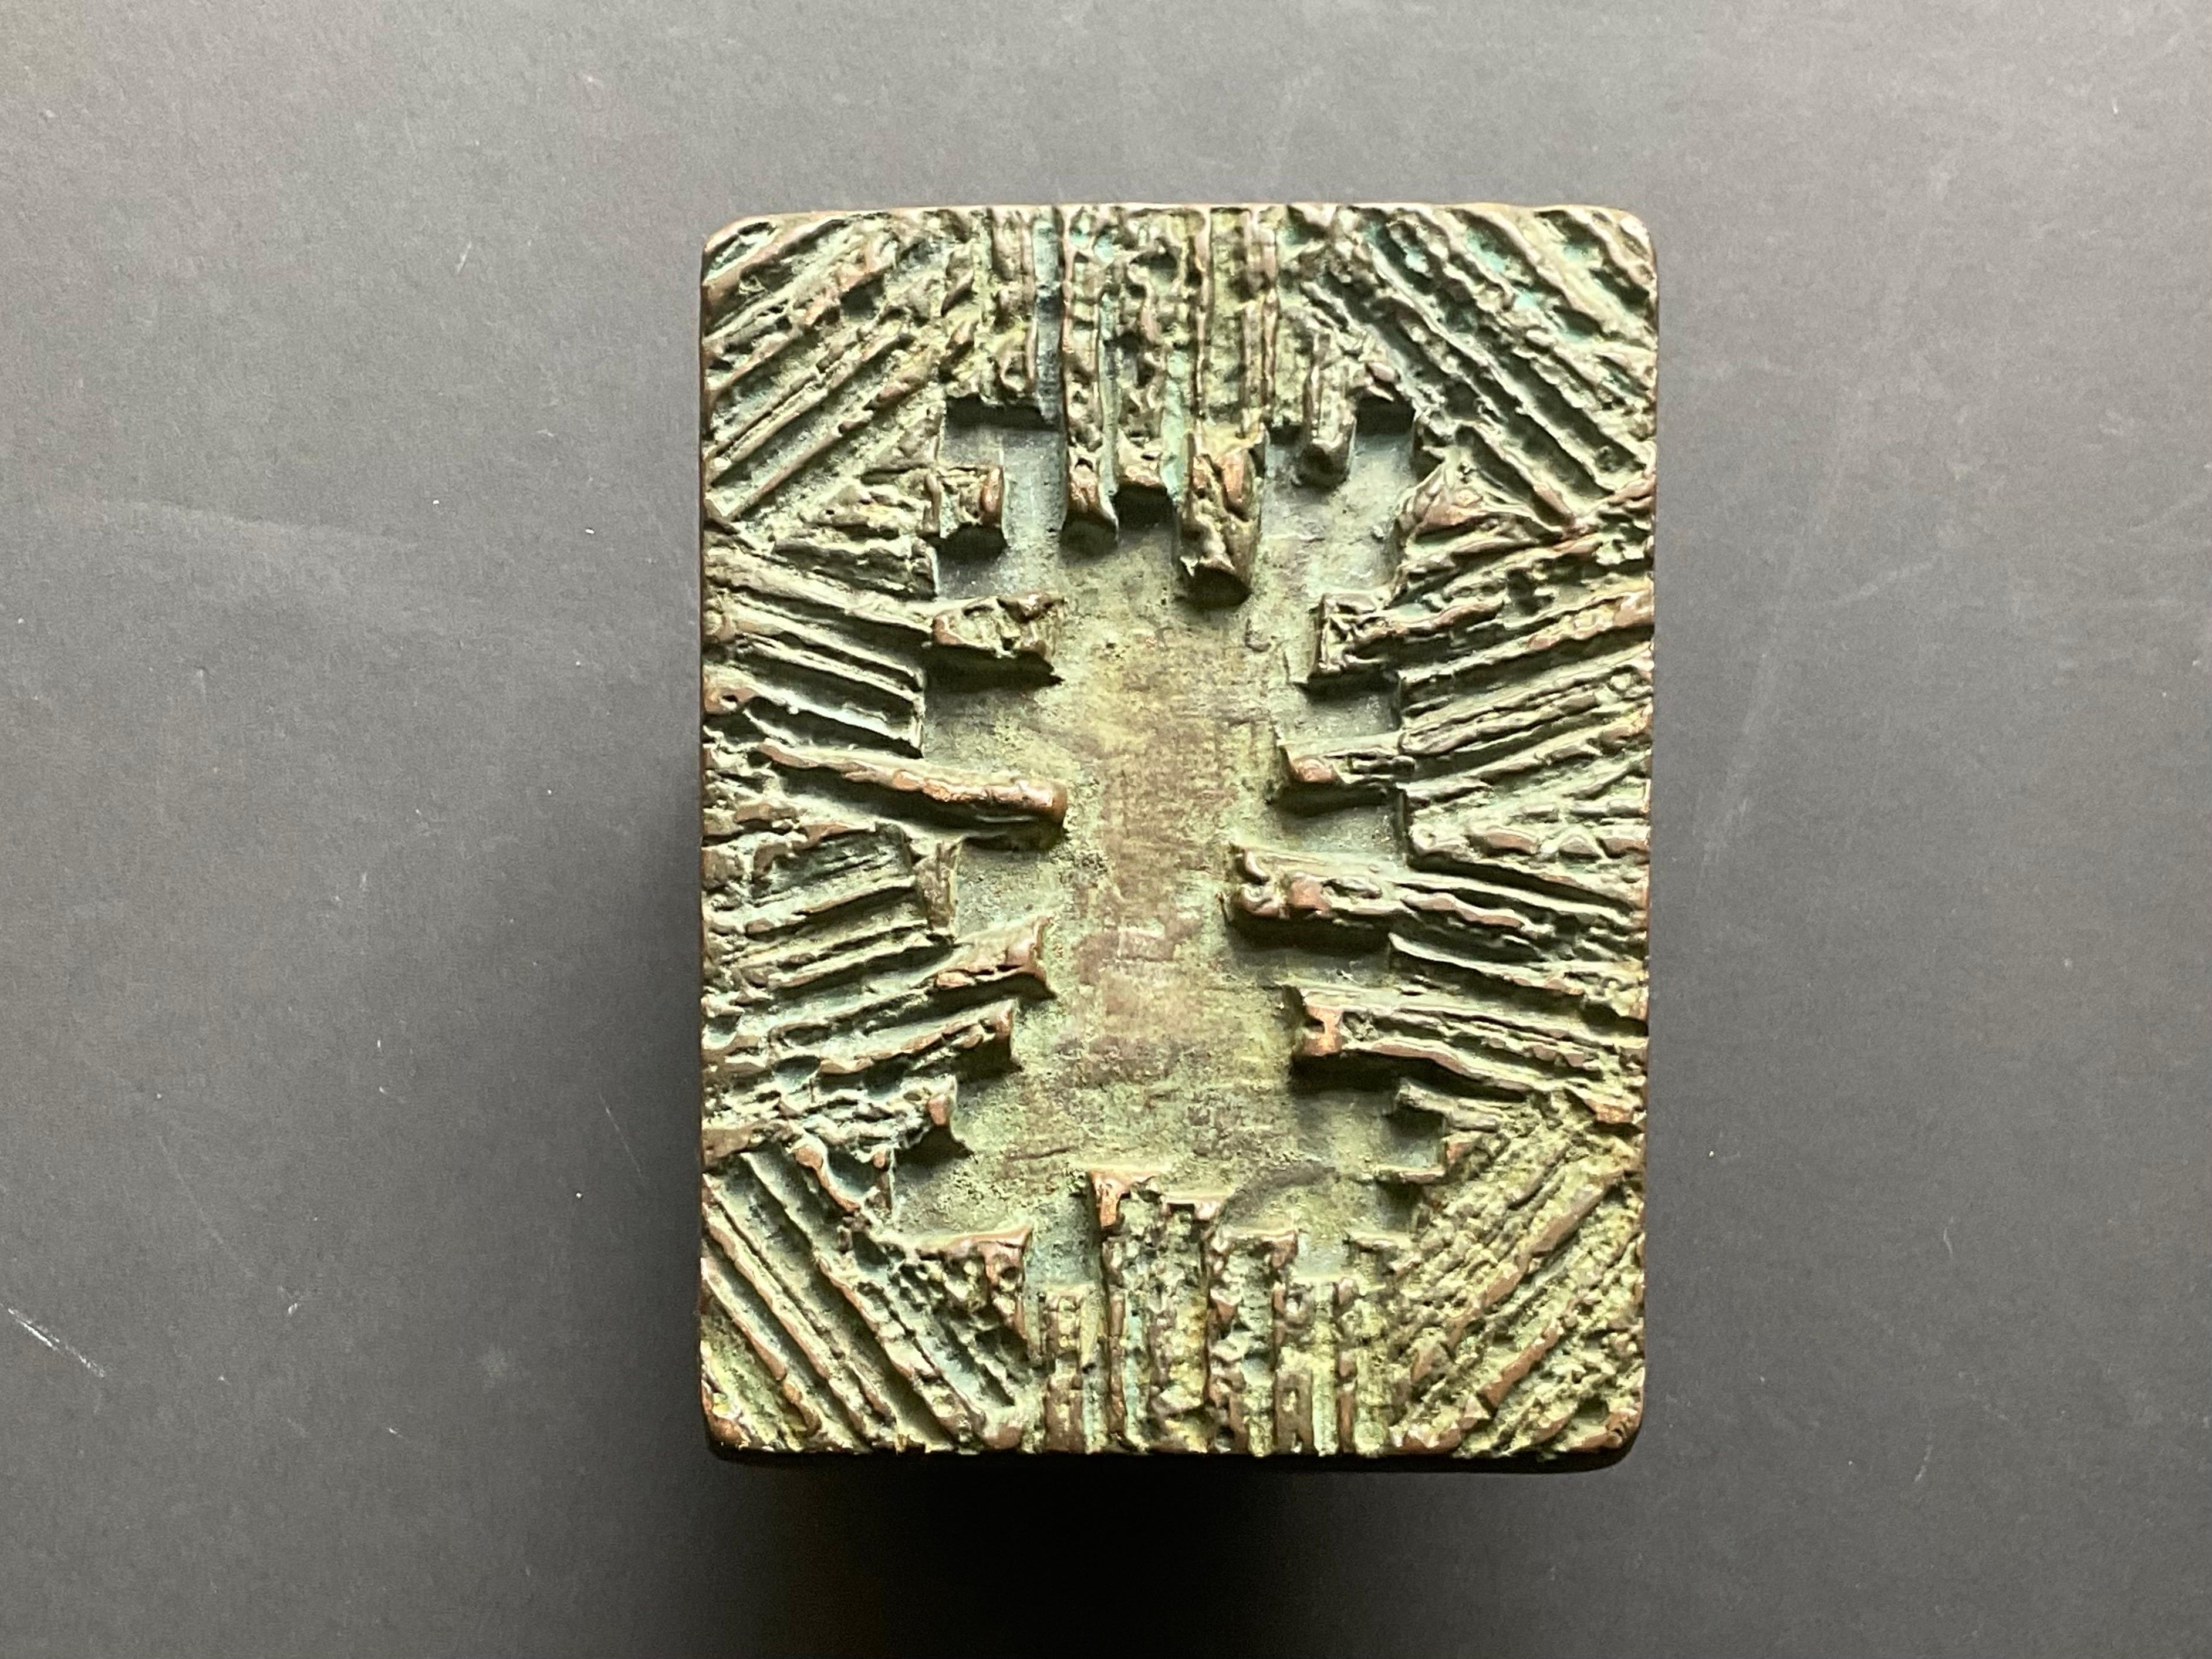 A sculptural bronze push or pull door handle with abstract relief. Second half 20th century (probably 1970s), found in Germany.

A heavy rectangular piece, made of cast metal, with a heavy green/brown patina. Overall good vintage condition with